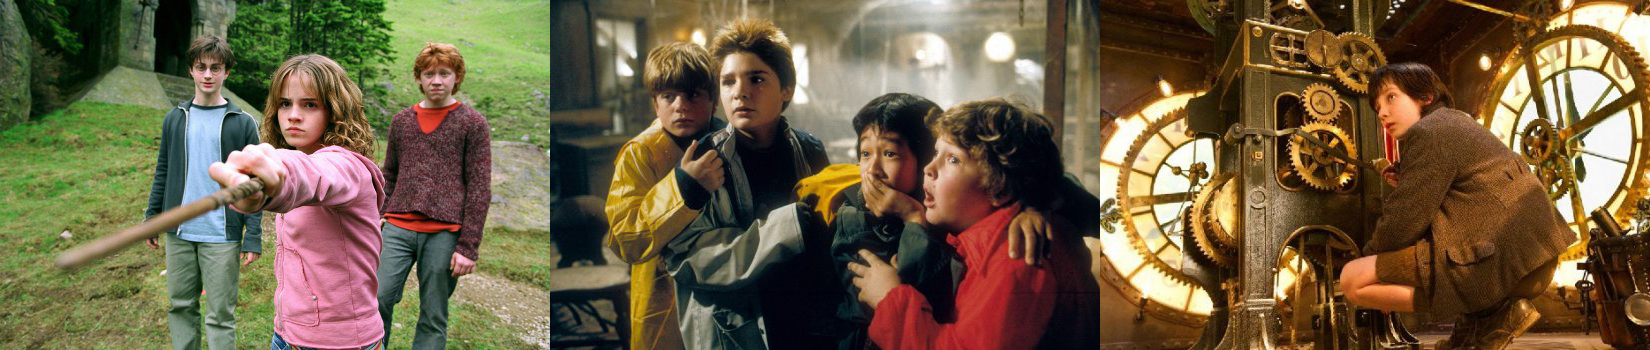 Stills from Harry Potter, The Goonies and Hugo.